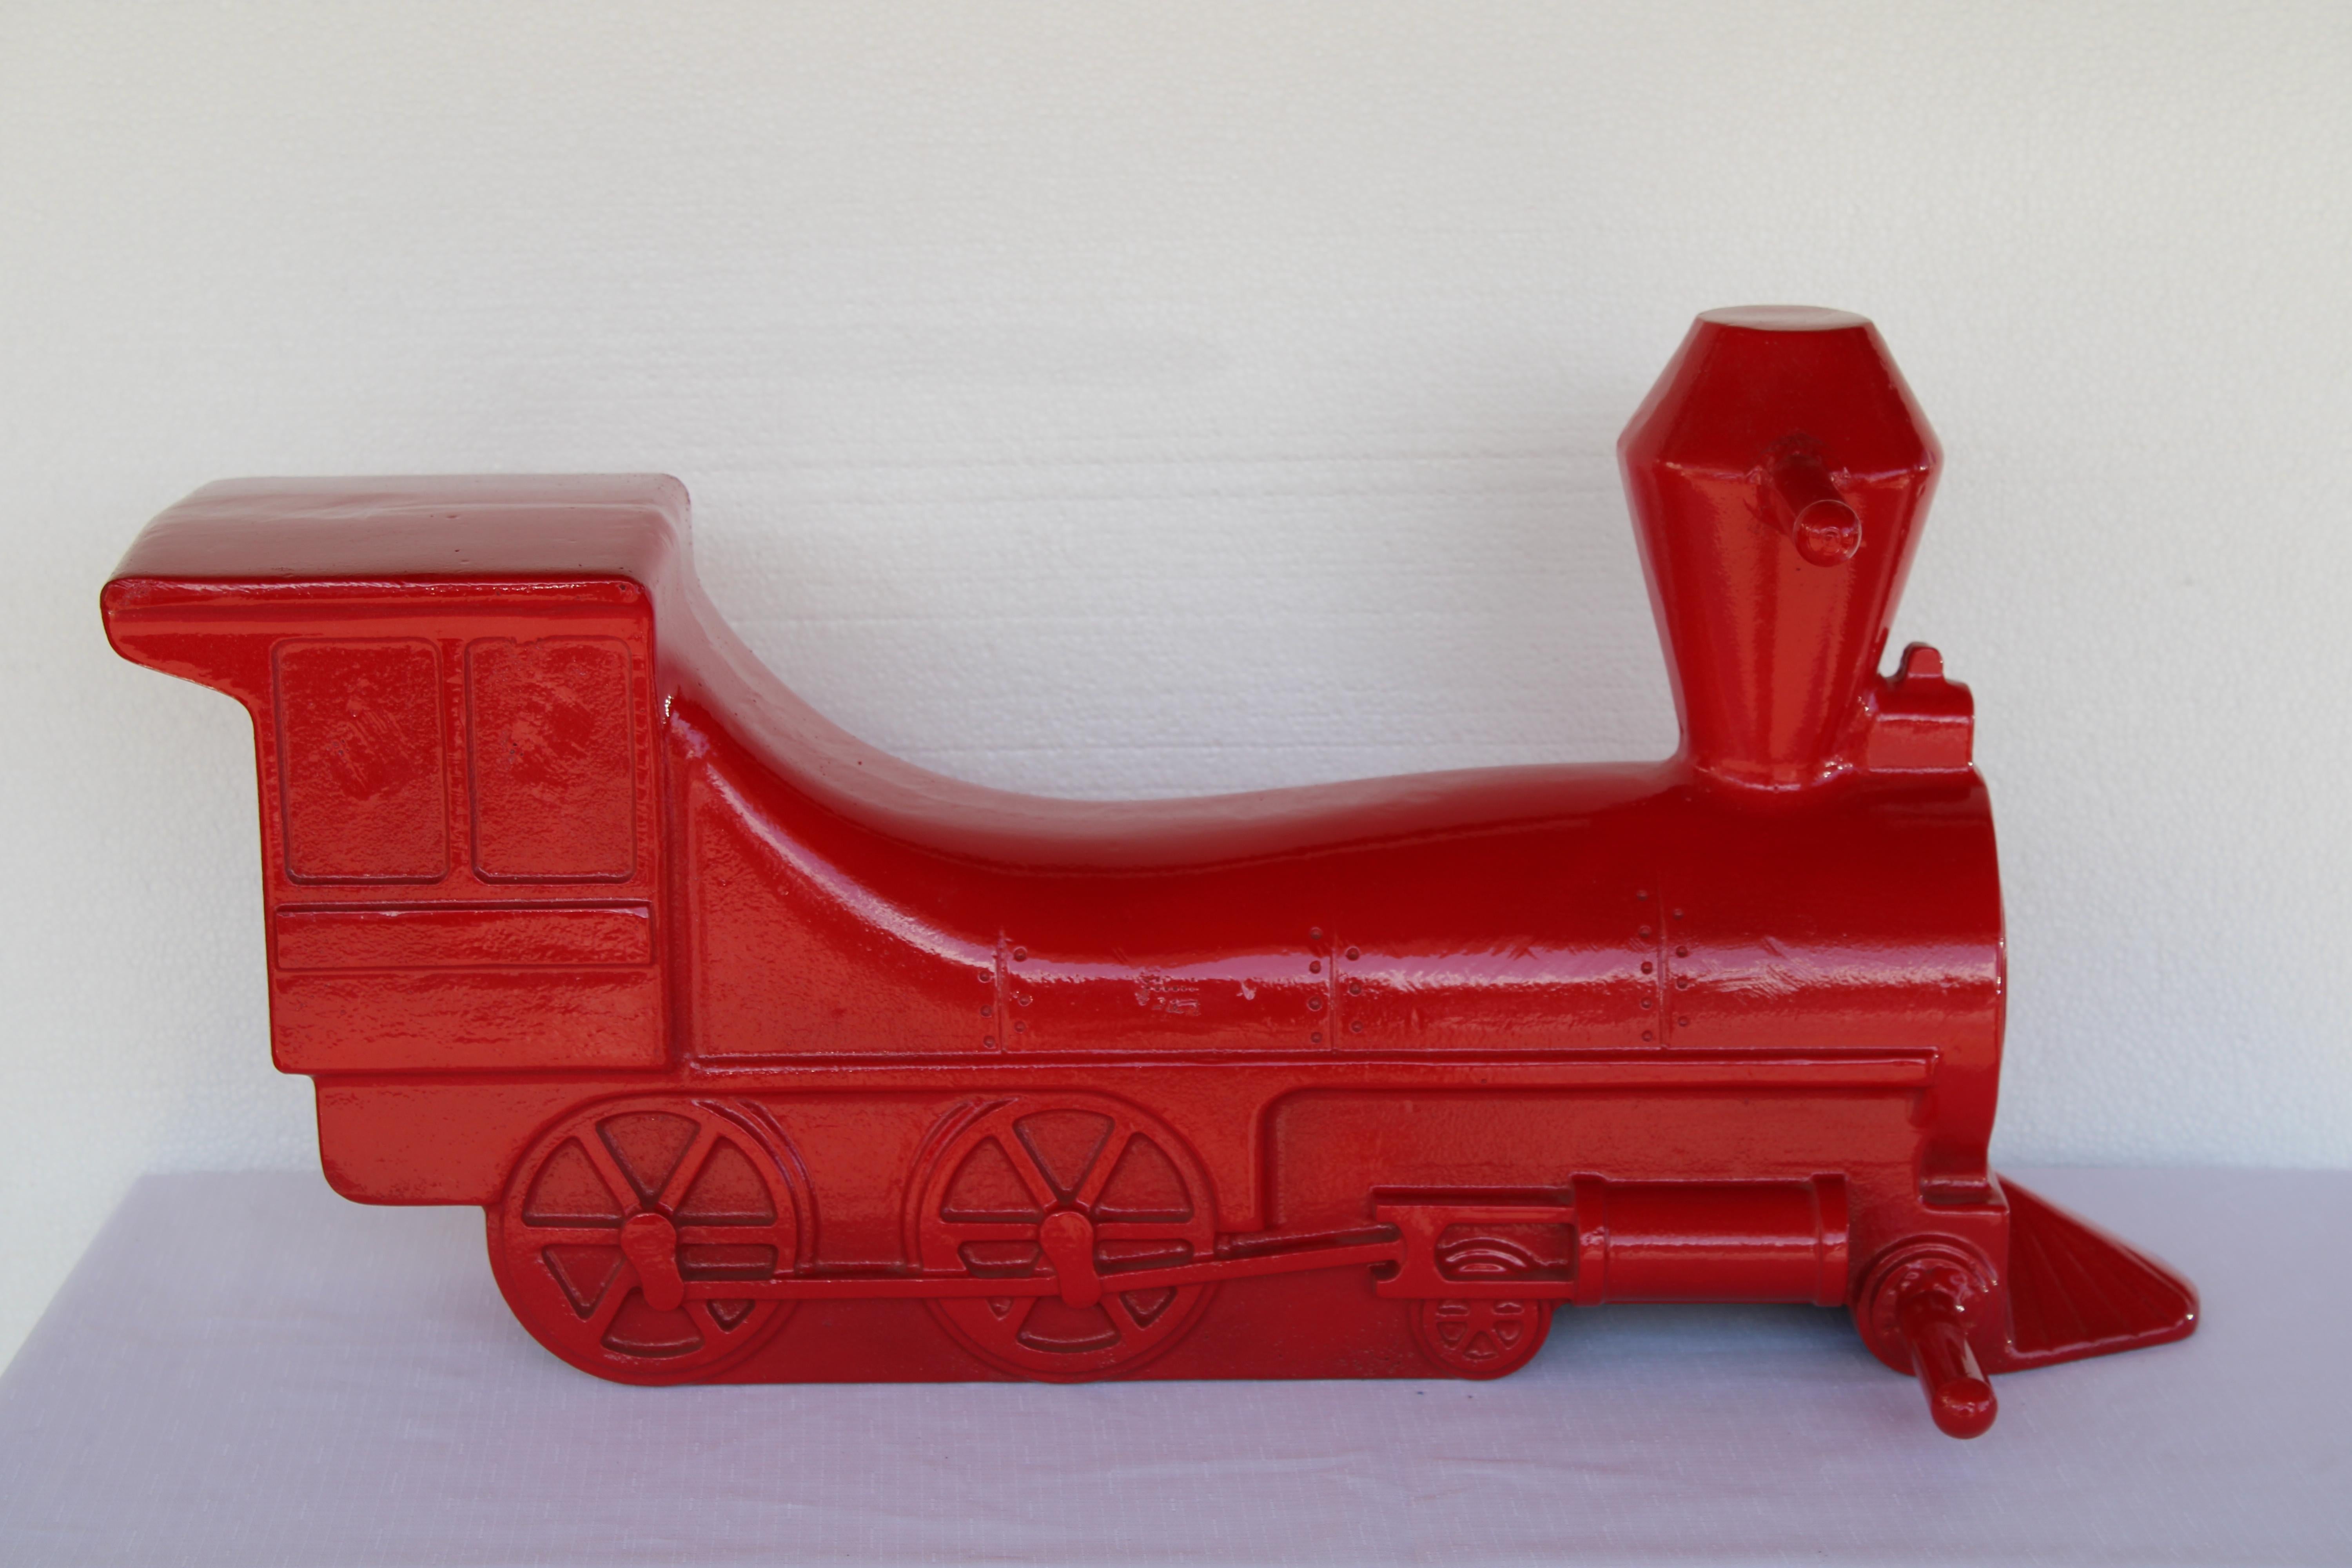 Aluminum Red Locomotive Playground Toy Sculpture In Good Condition For Sale In Palm Springs, CA